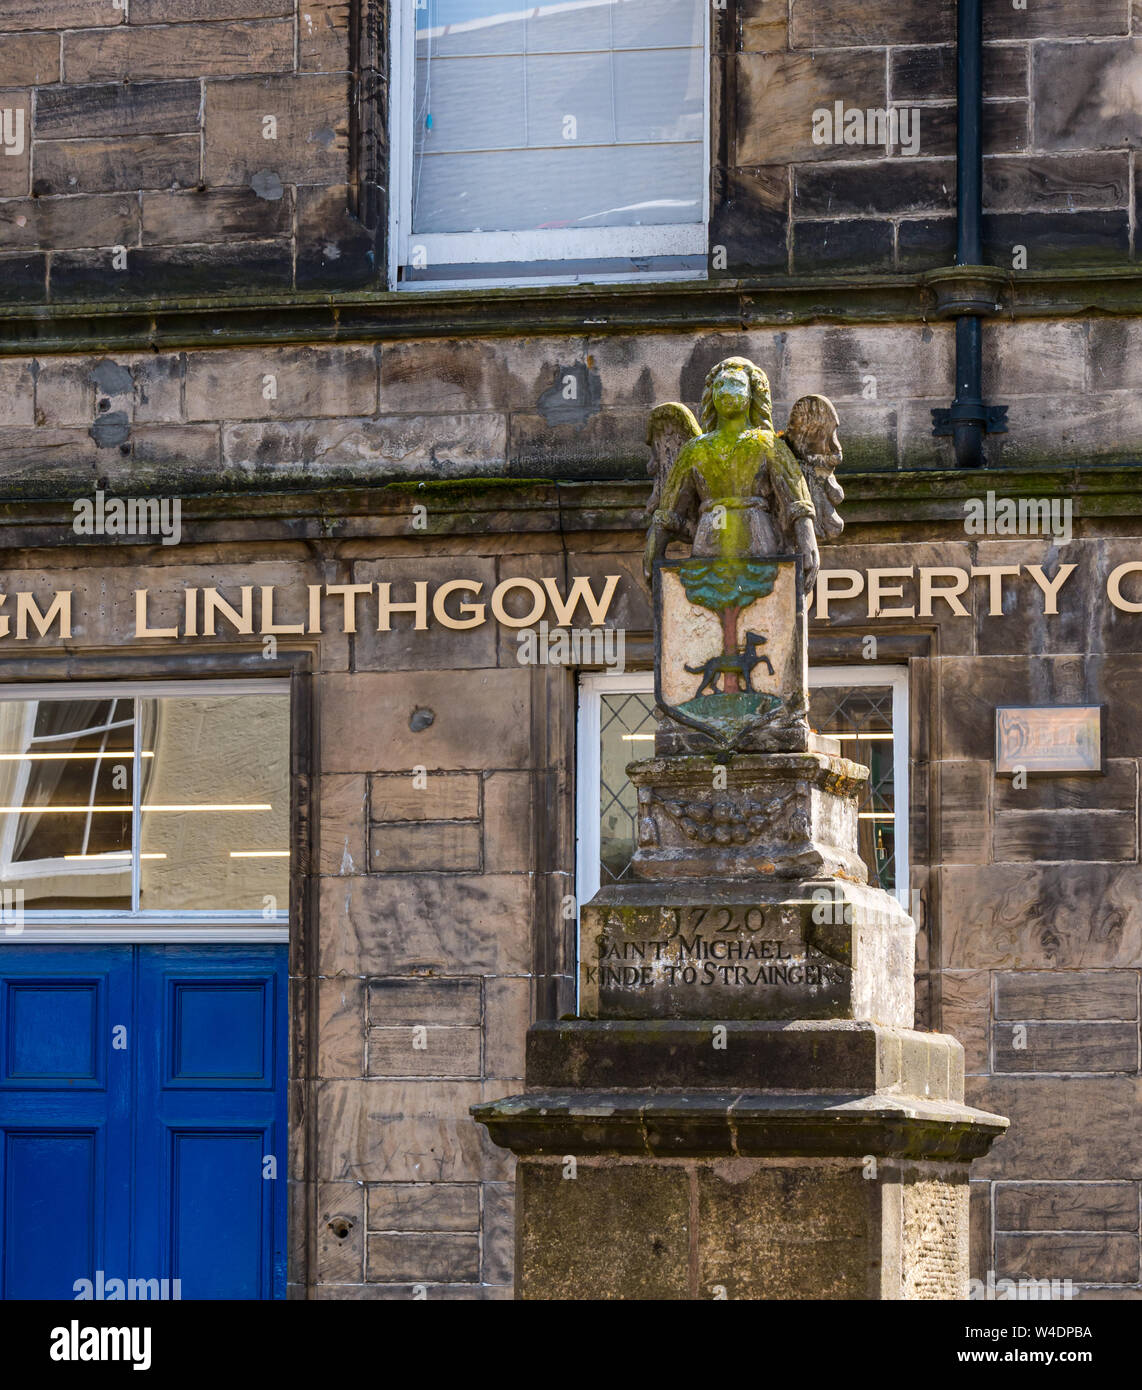 1720 Date Quote Saint Michael Is Kind To Strangers St Michael S Well High Street Linlithgow Scotland Uk Stock Photo Alamy